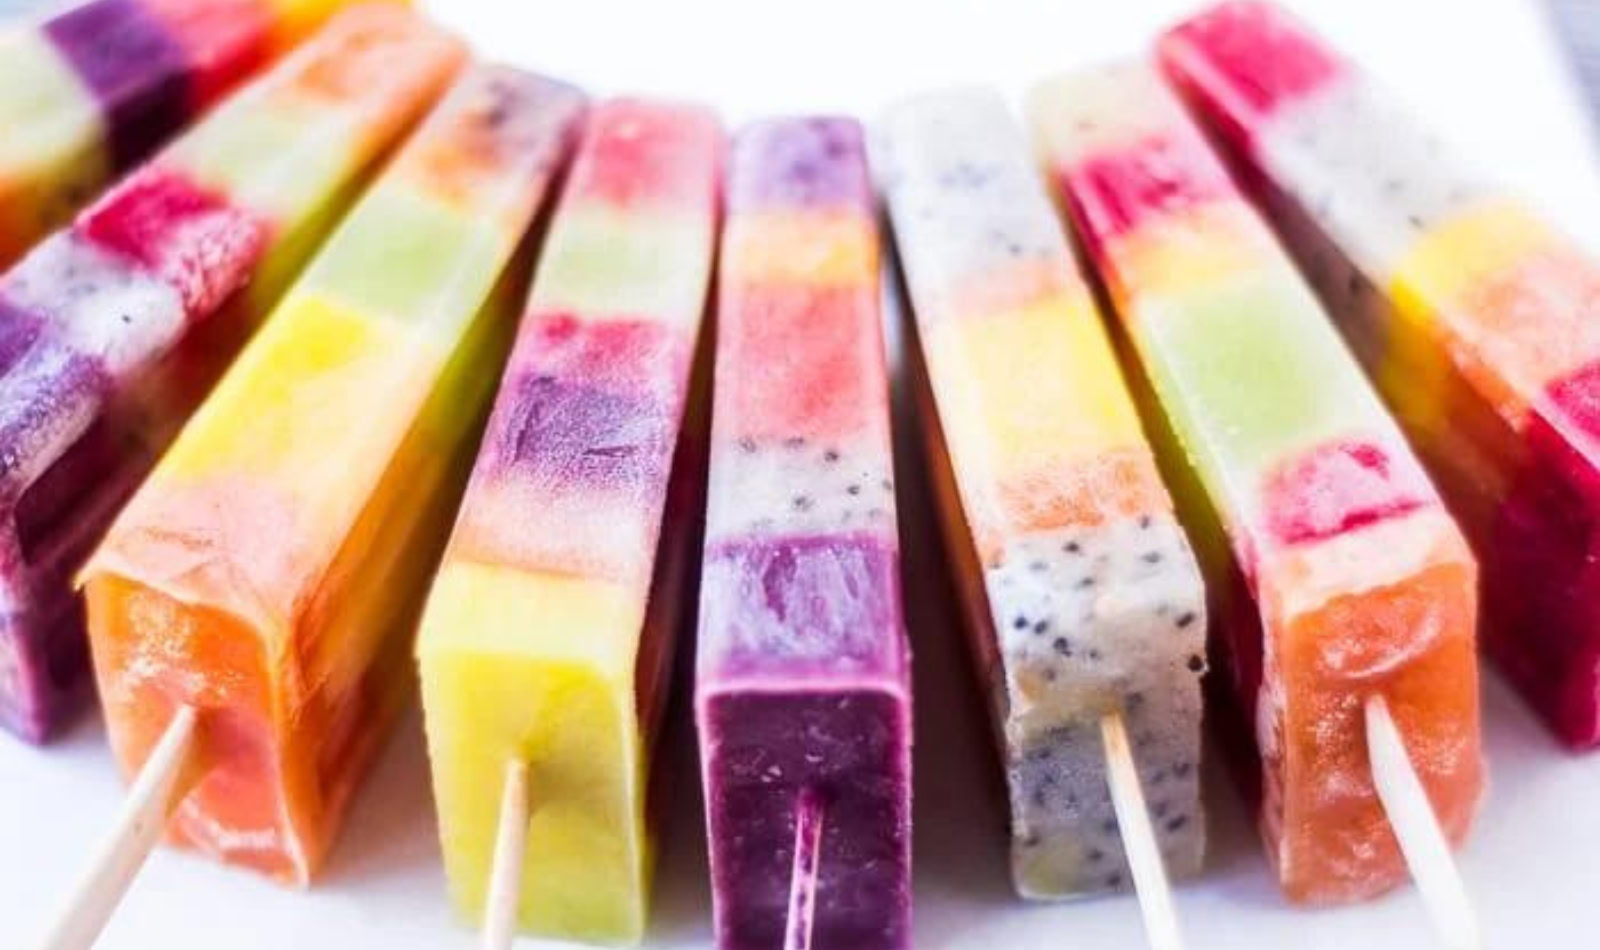 A display of rainbow fruit popsicles